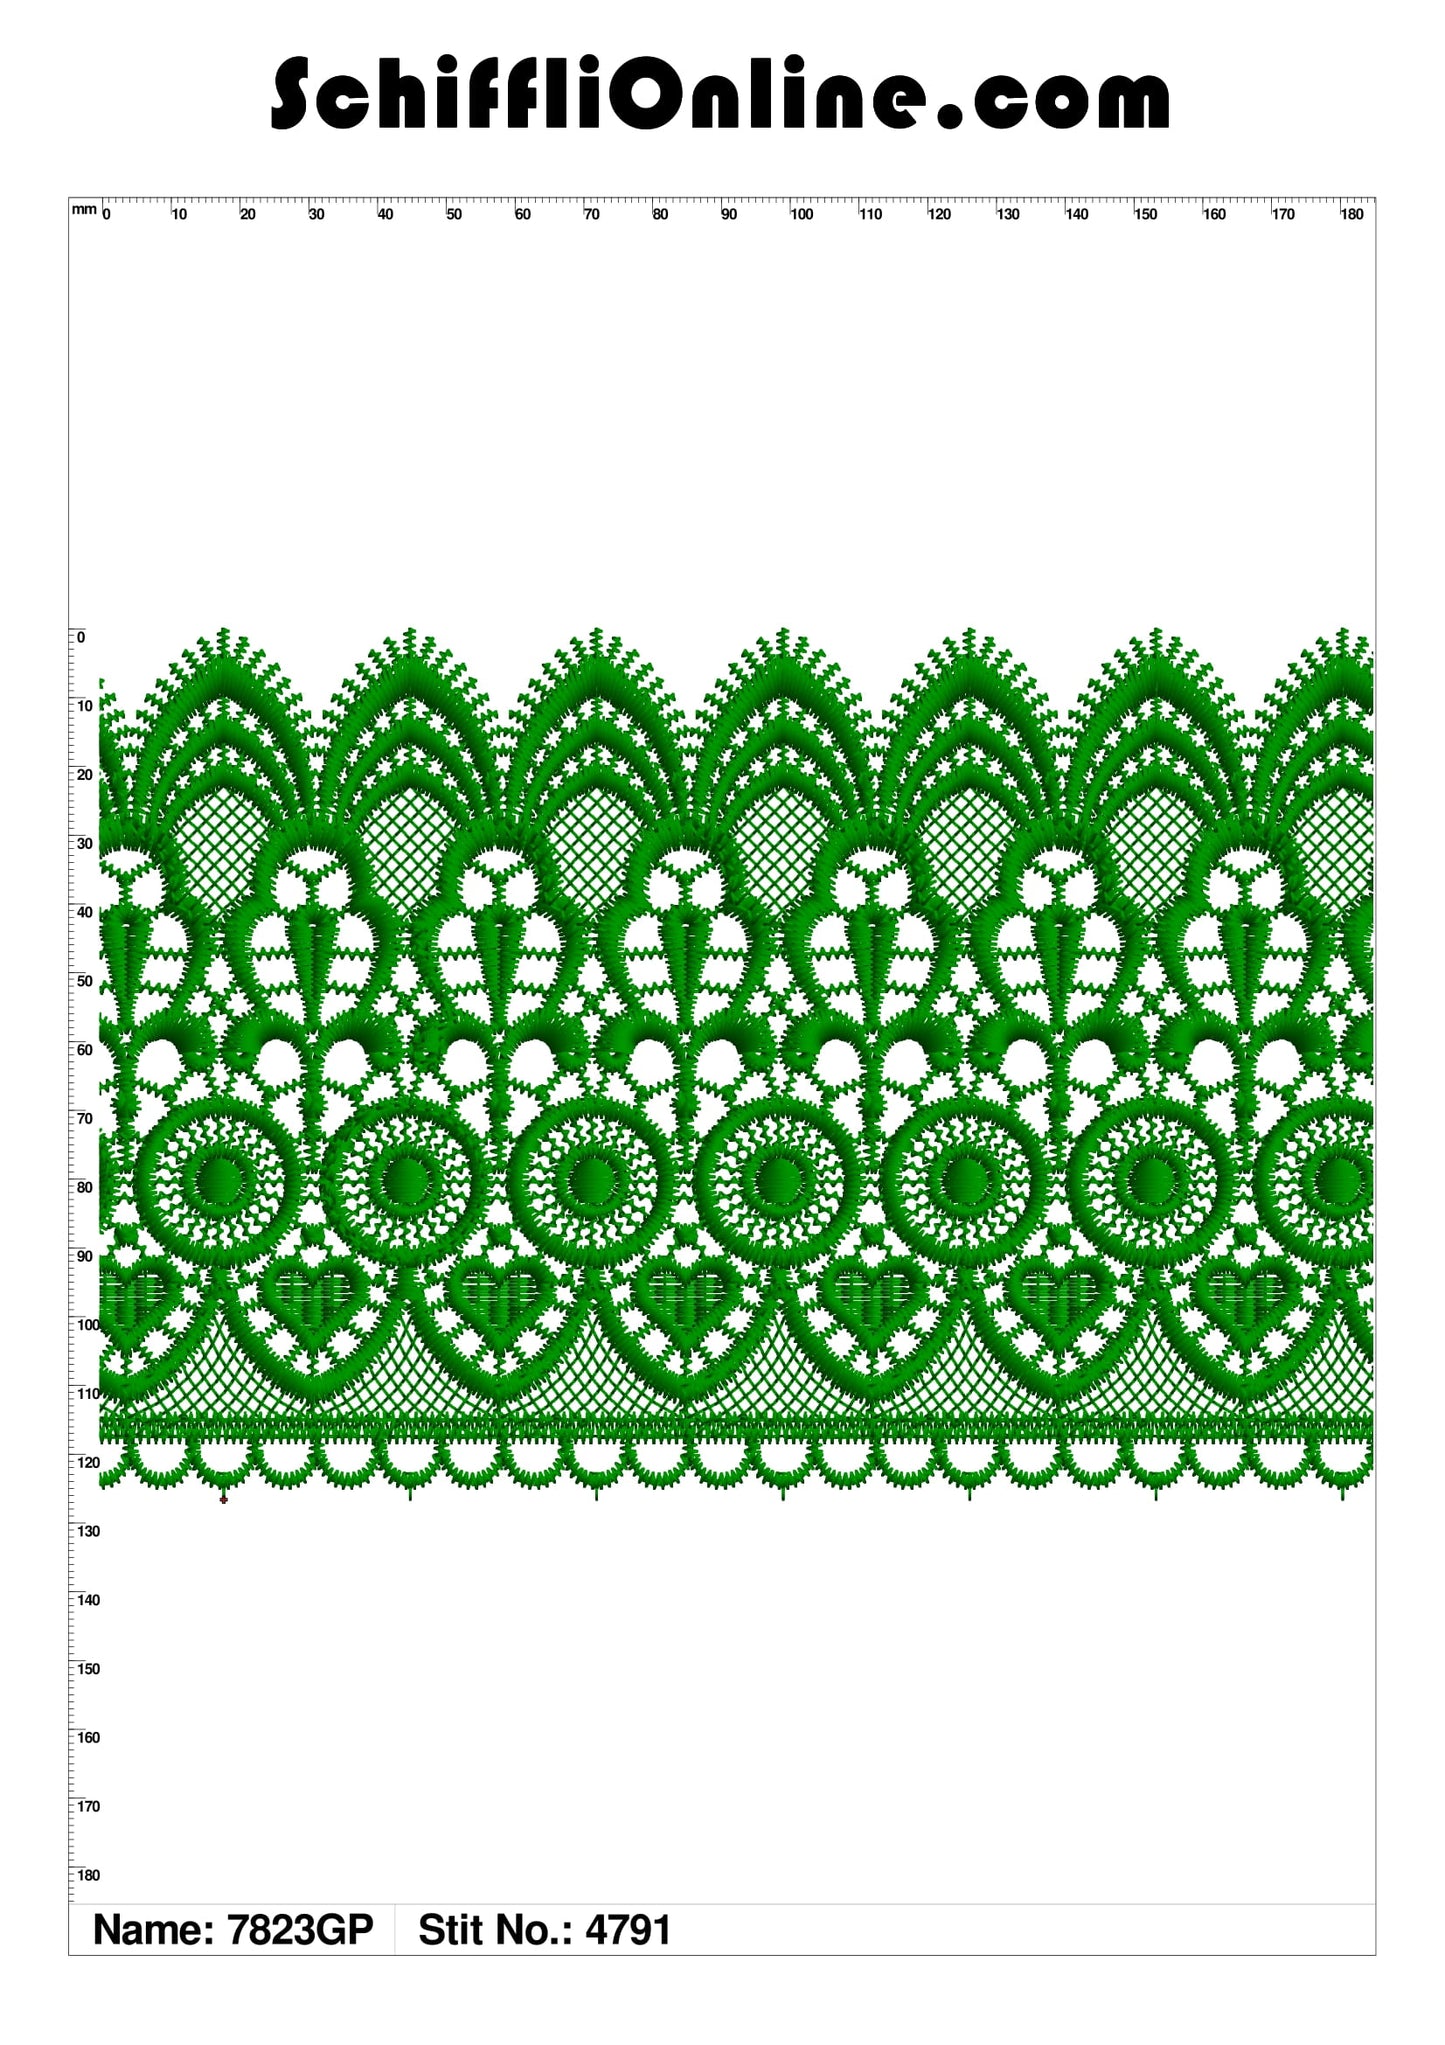 Book 157 CHEMICAL LACE 4X4 50 DESIGNS